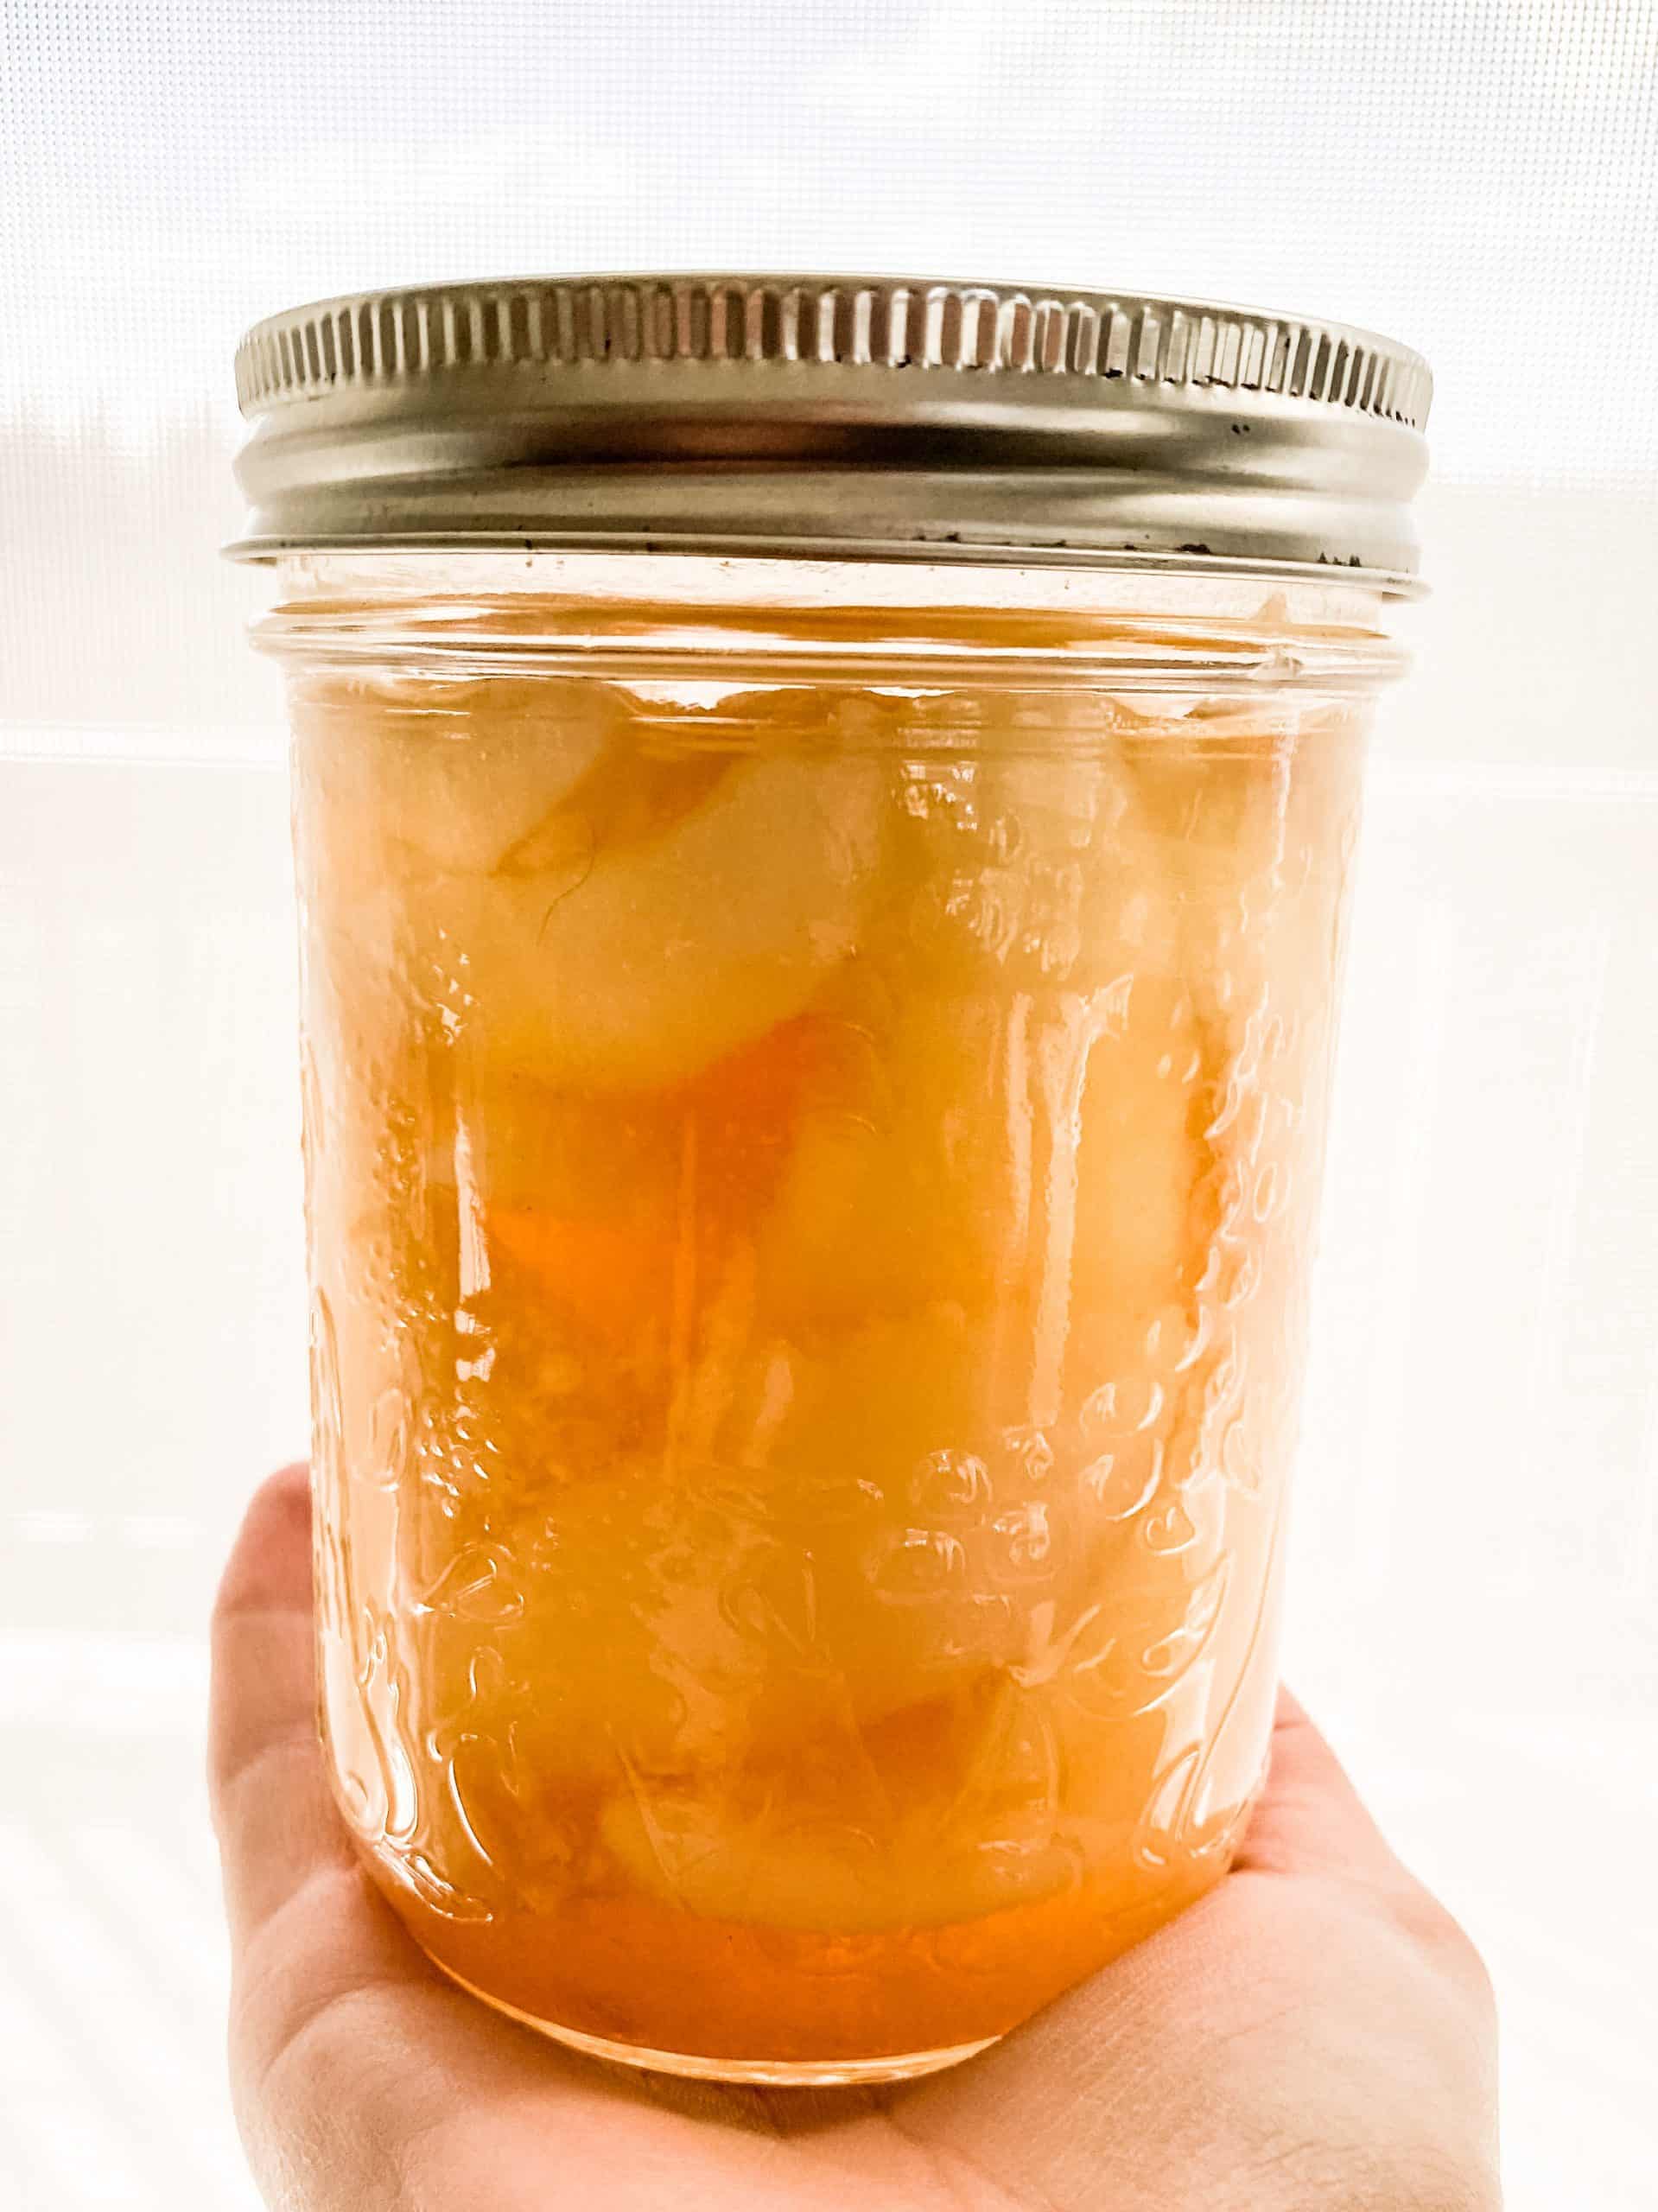 Canned Spiced Pears Recipe With Chai Tea